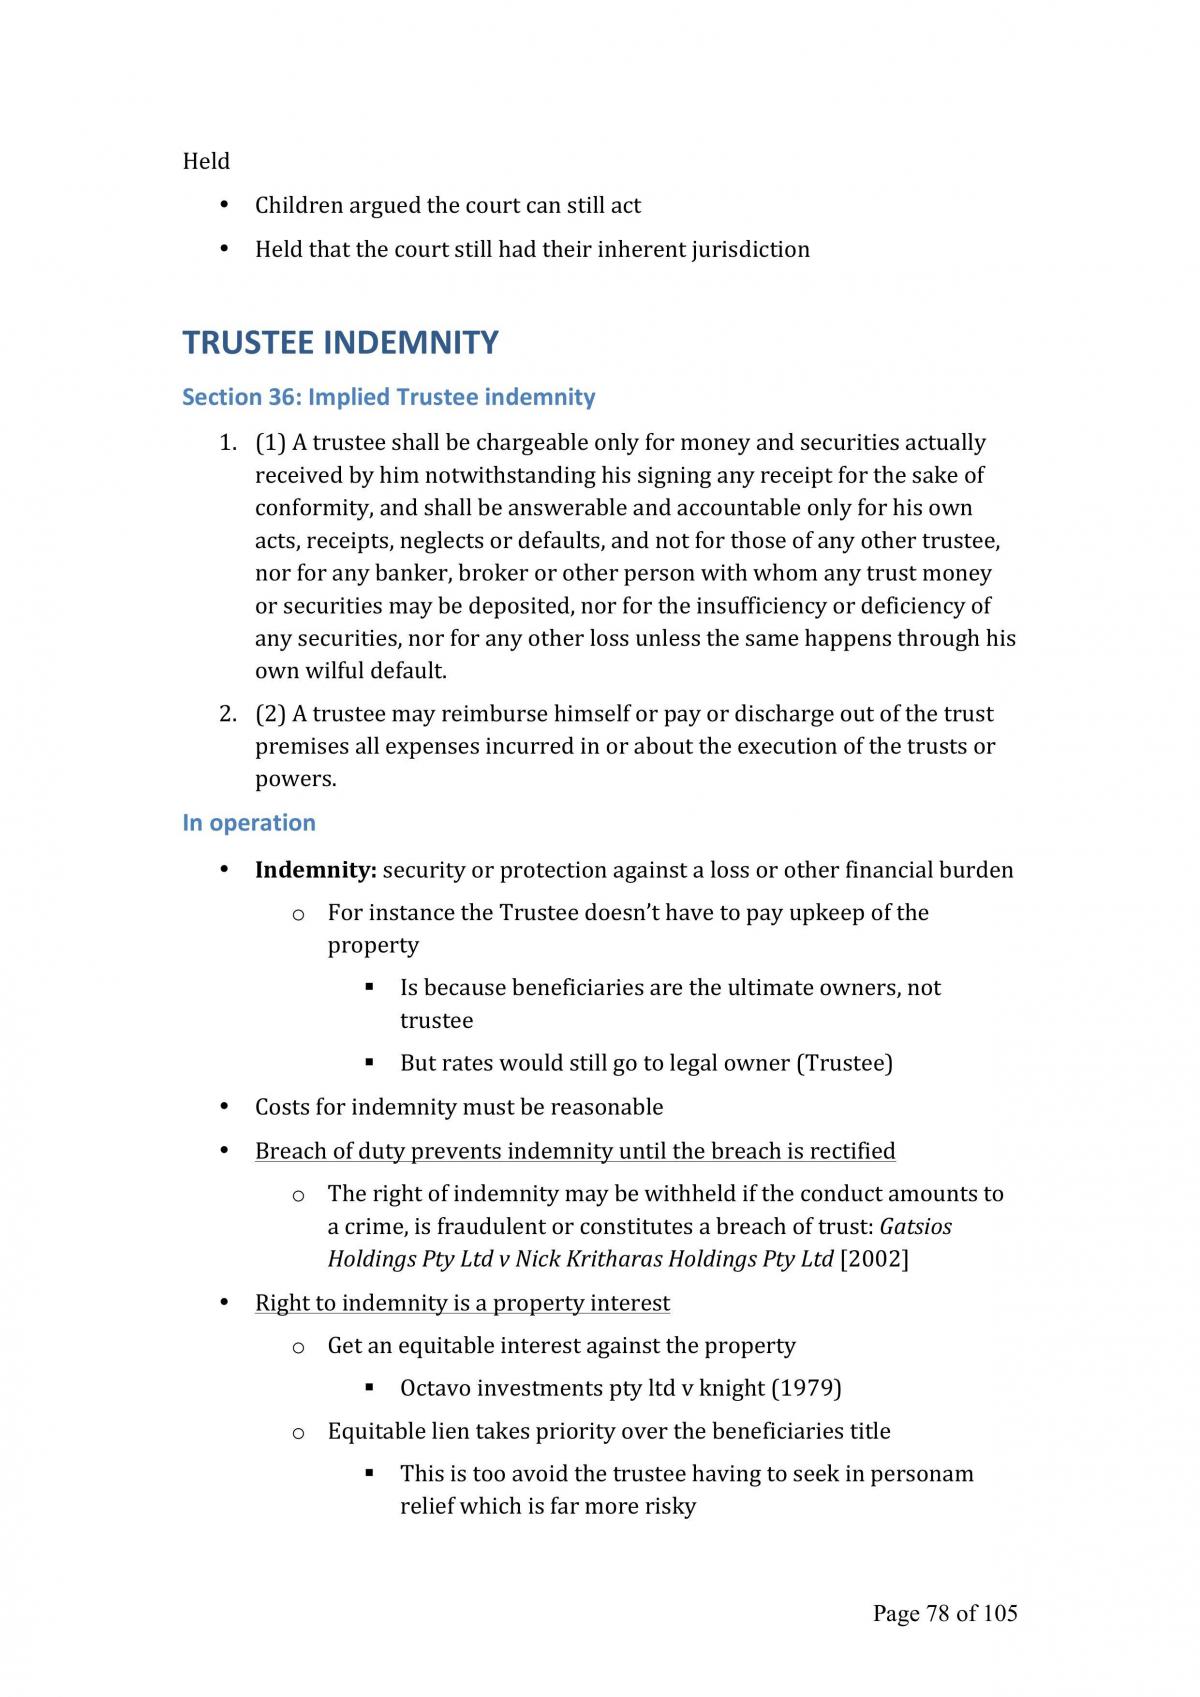 MLL405 Equity and Trusts Notes - Page 78